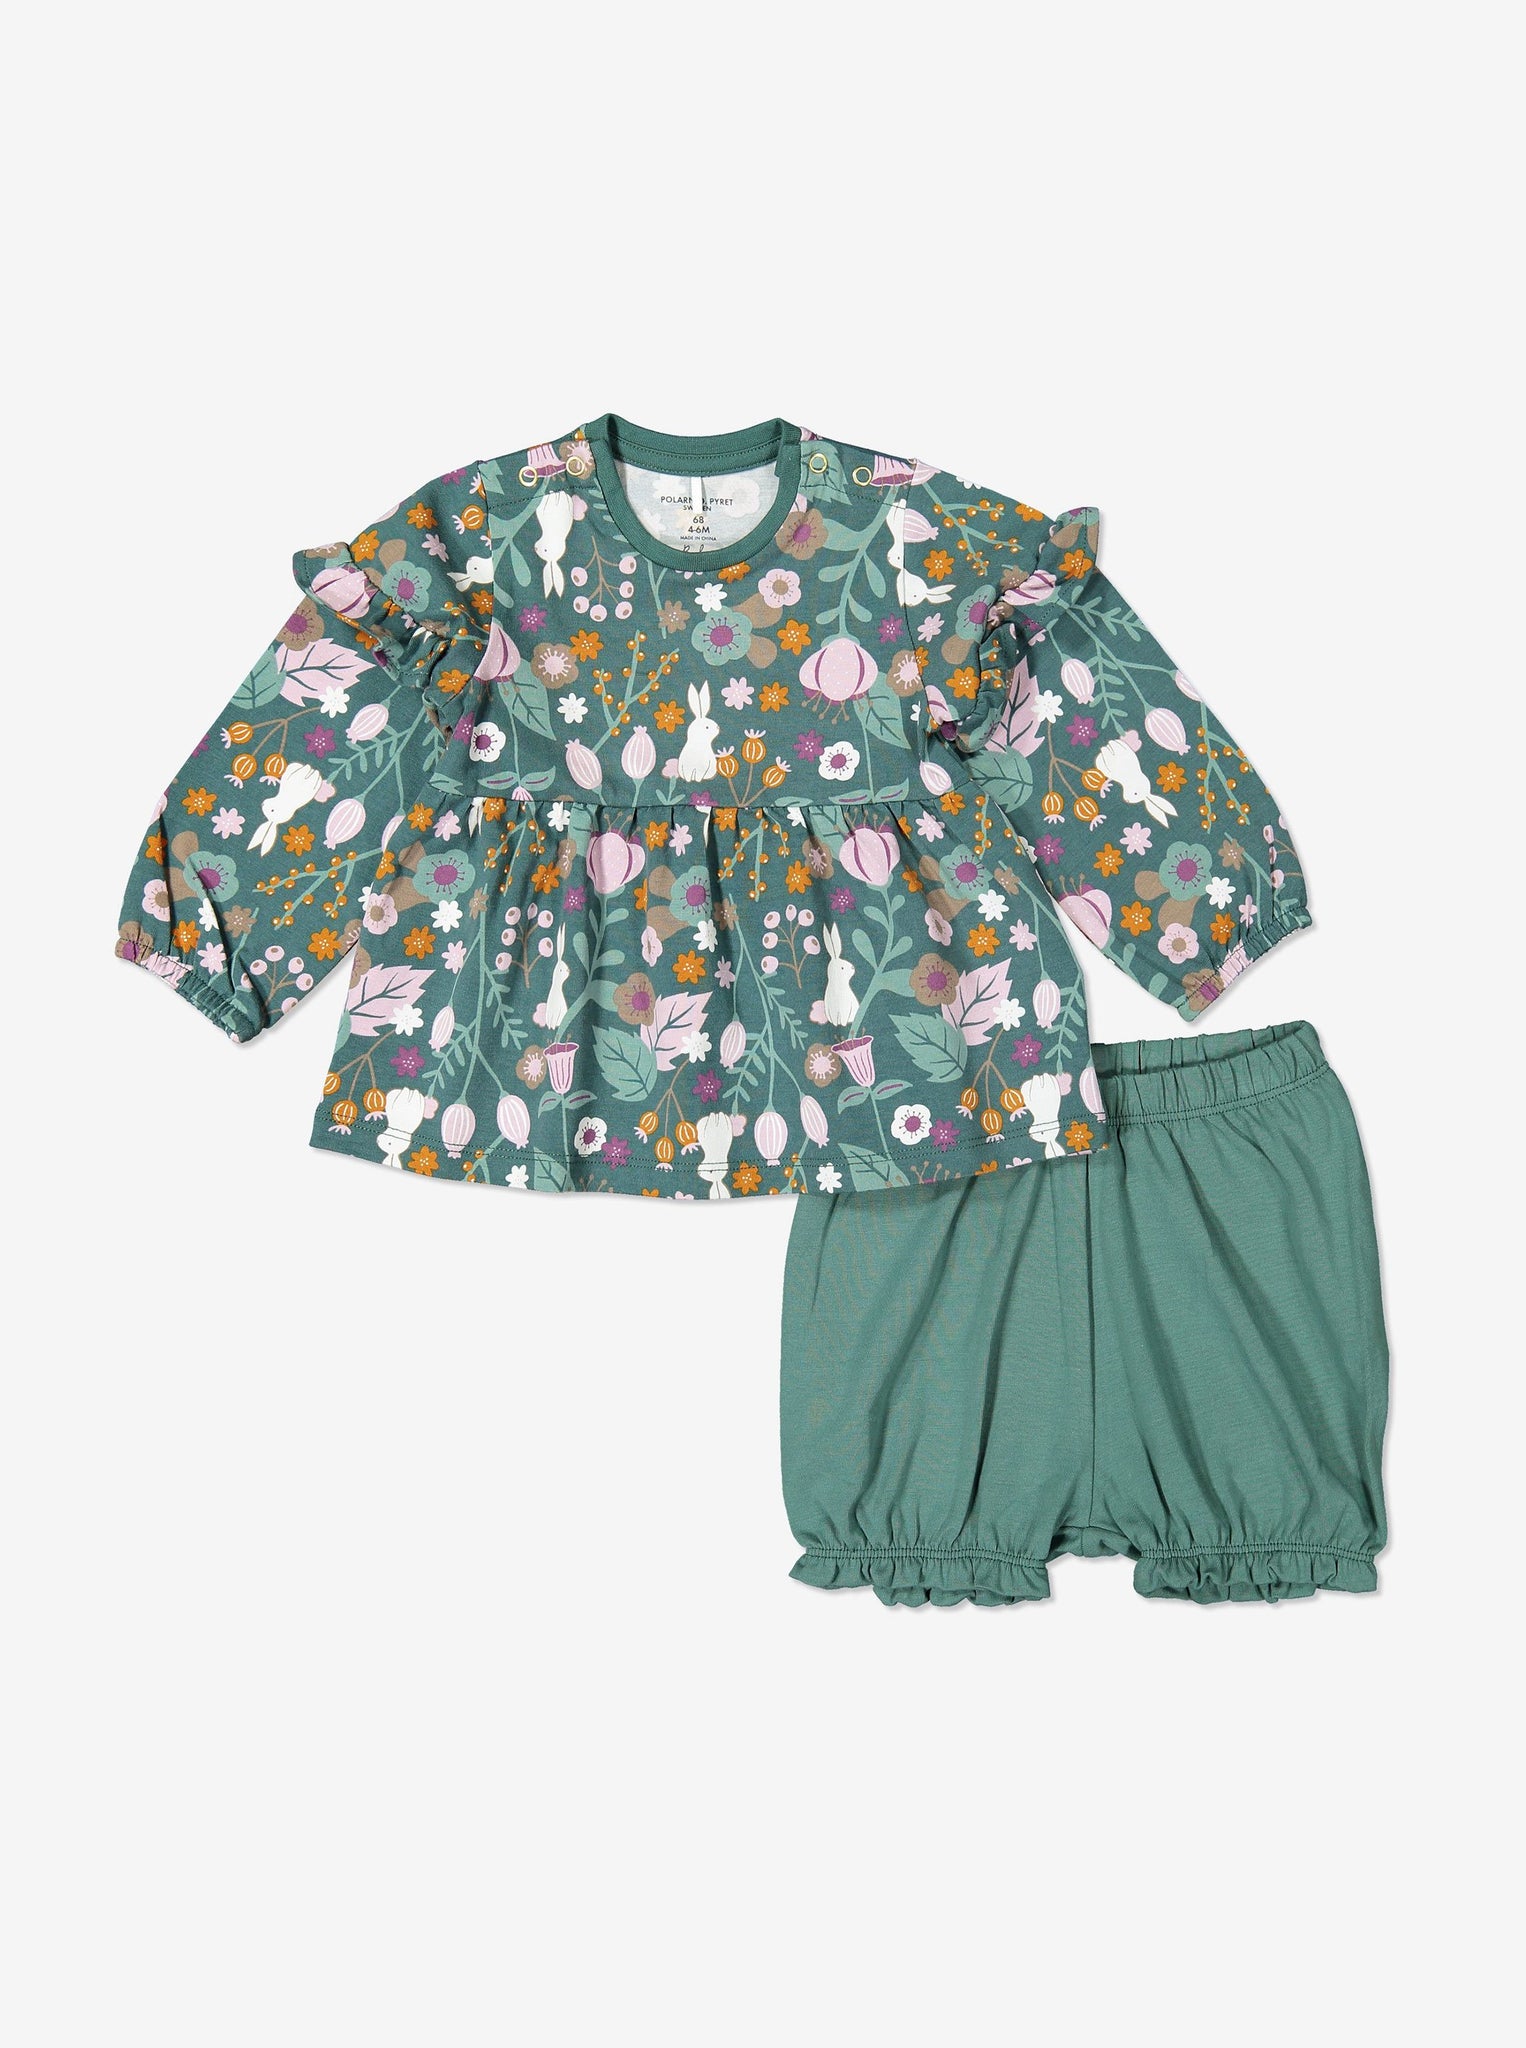 Matching set for baby girl in organic cotton comprising long sleeve top with woodland floral and bunny print. Shown with matching frilled bloomers in green.